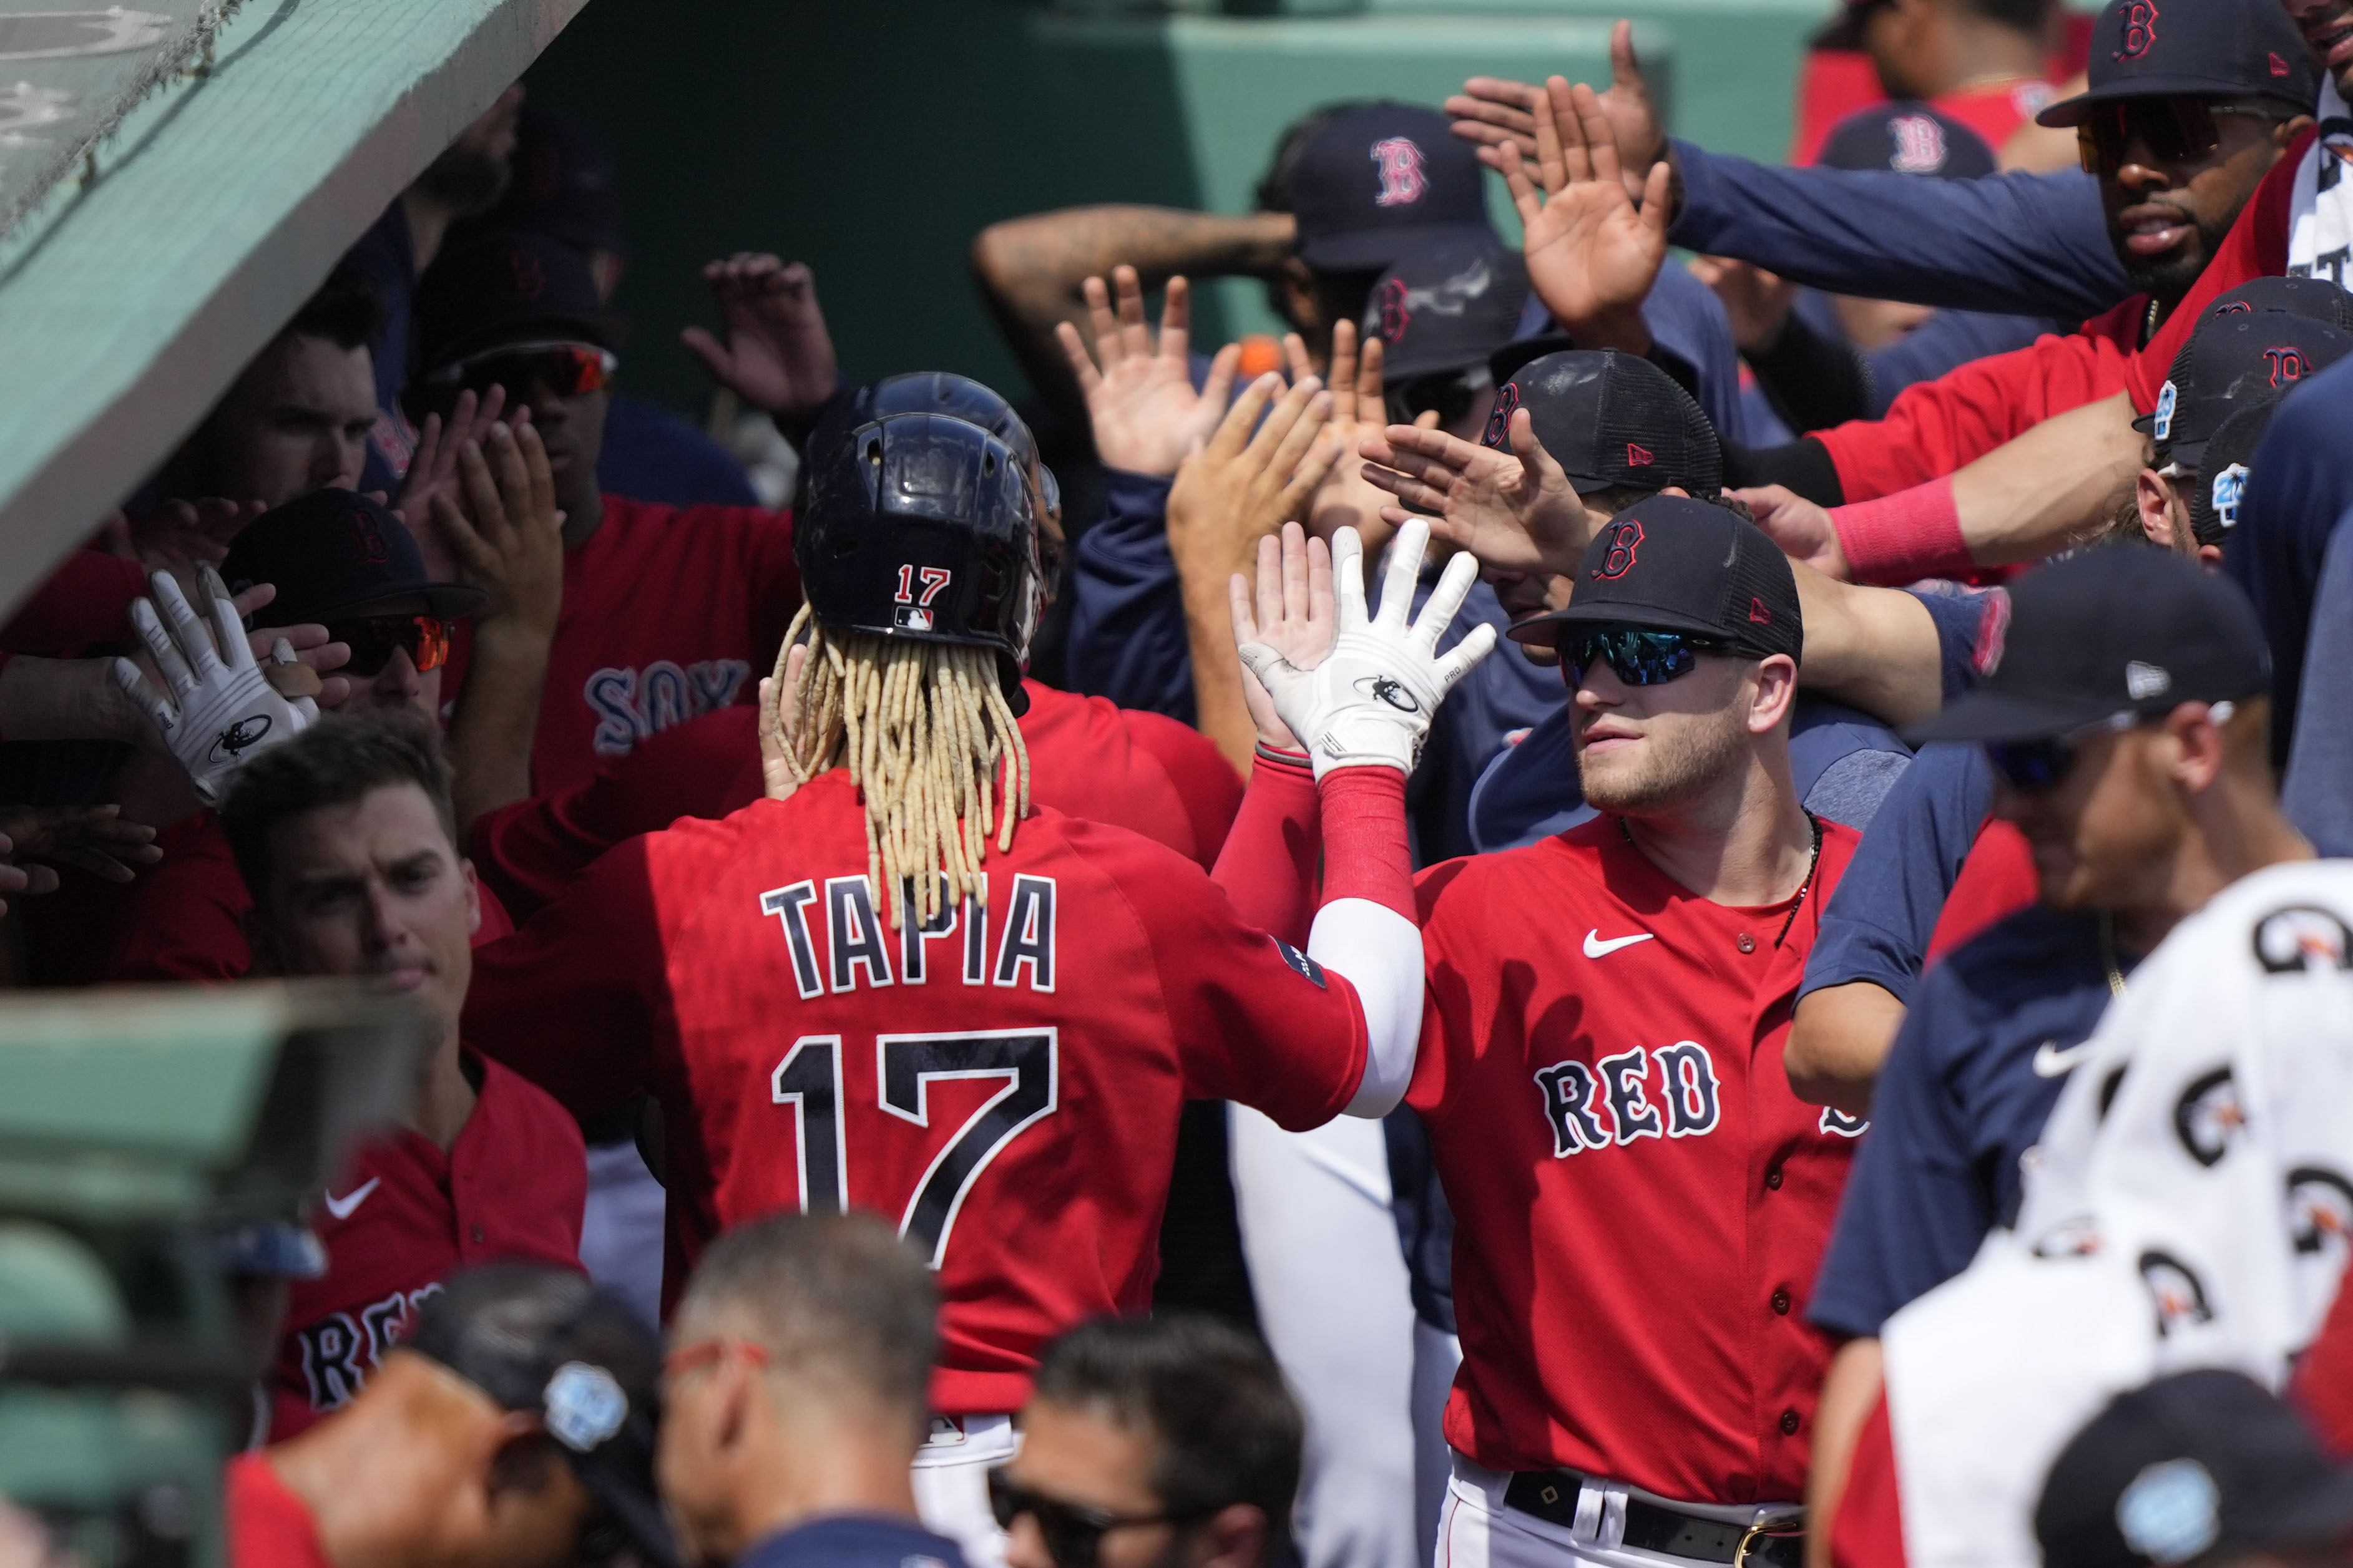 Friday's spring training report: Grand slam off reliever dooms Red Sox